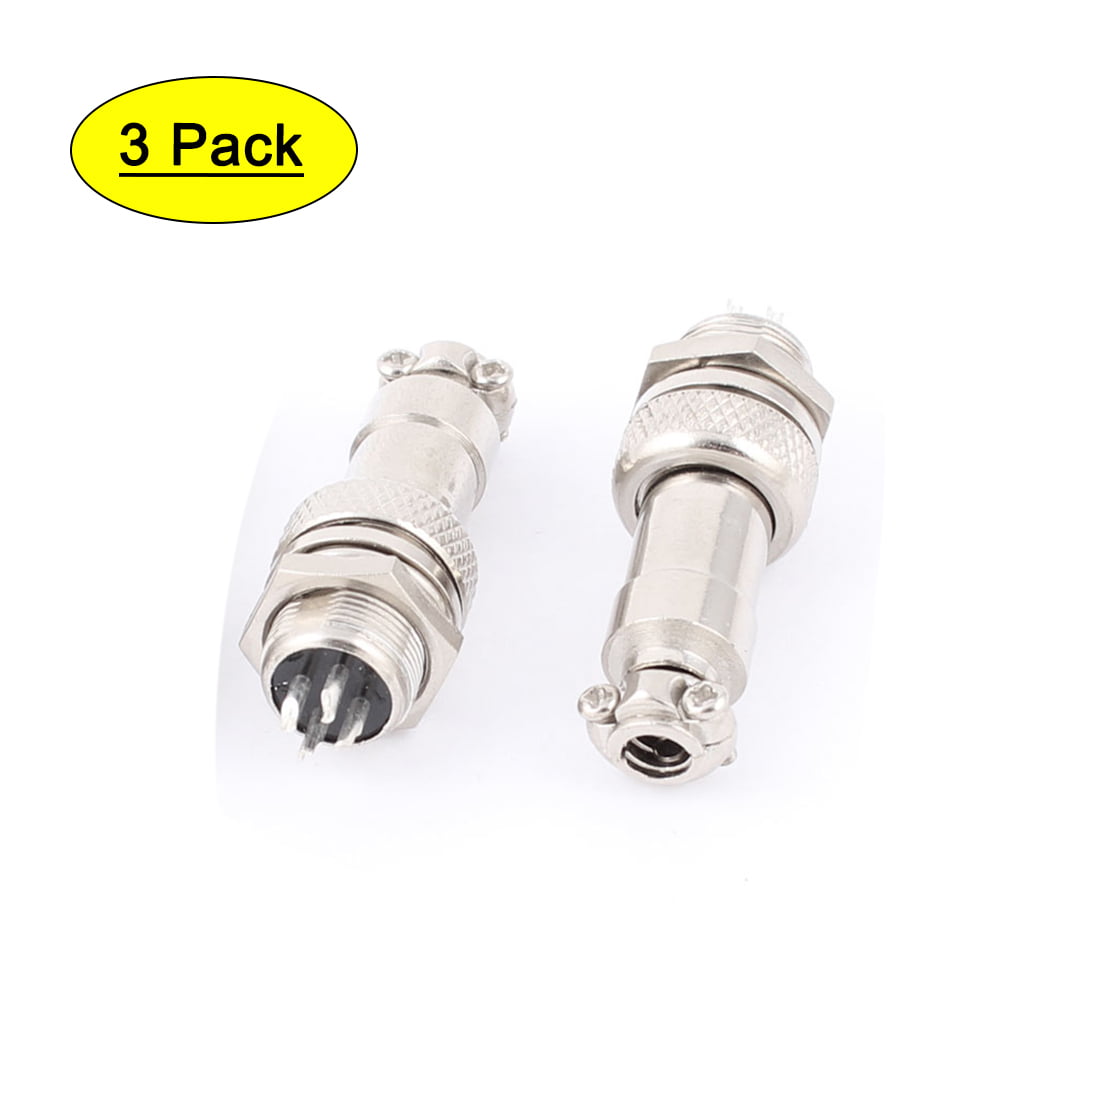 10 set GX12 4-pin Aviation Plug 12mm Male Female Panel Chassis Metal Connector 